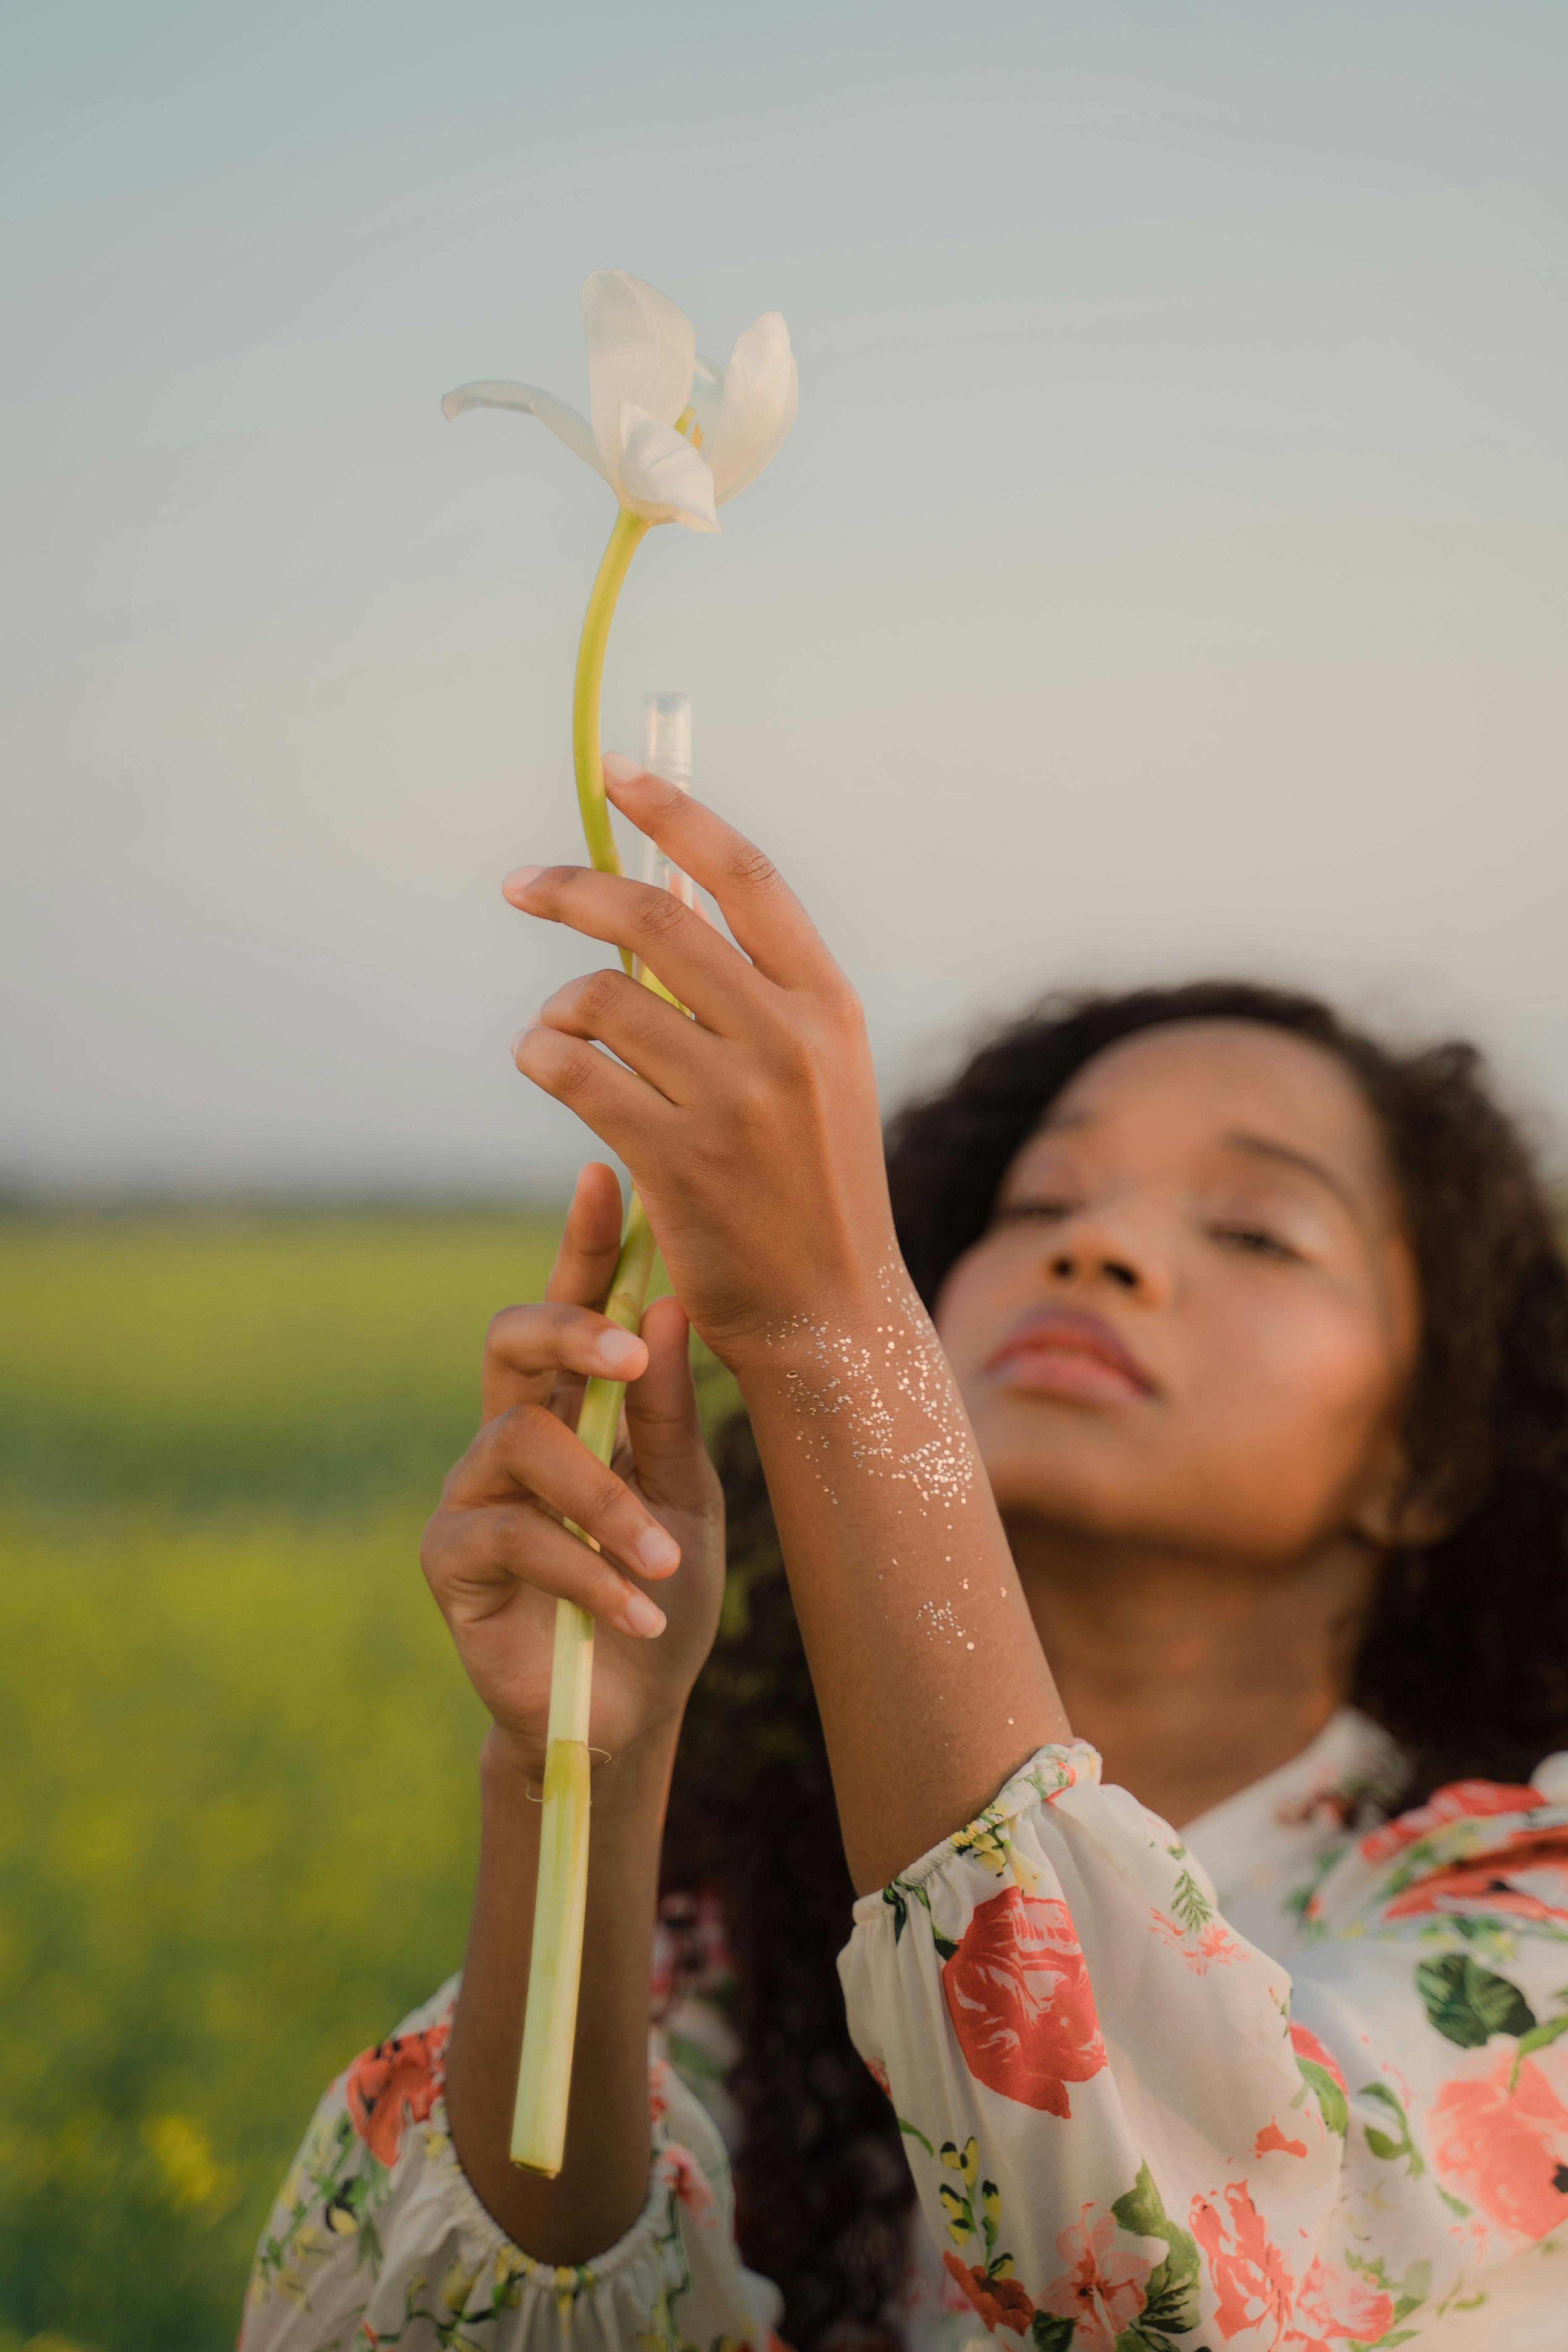 young woman holding white flower with long stem and testing tube